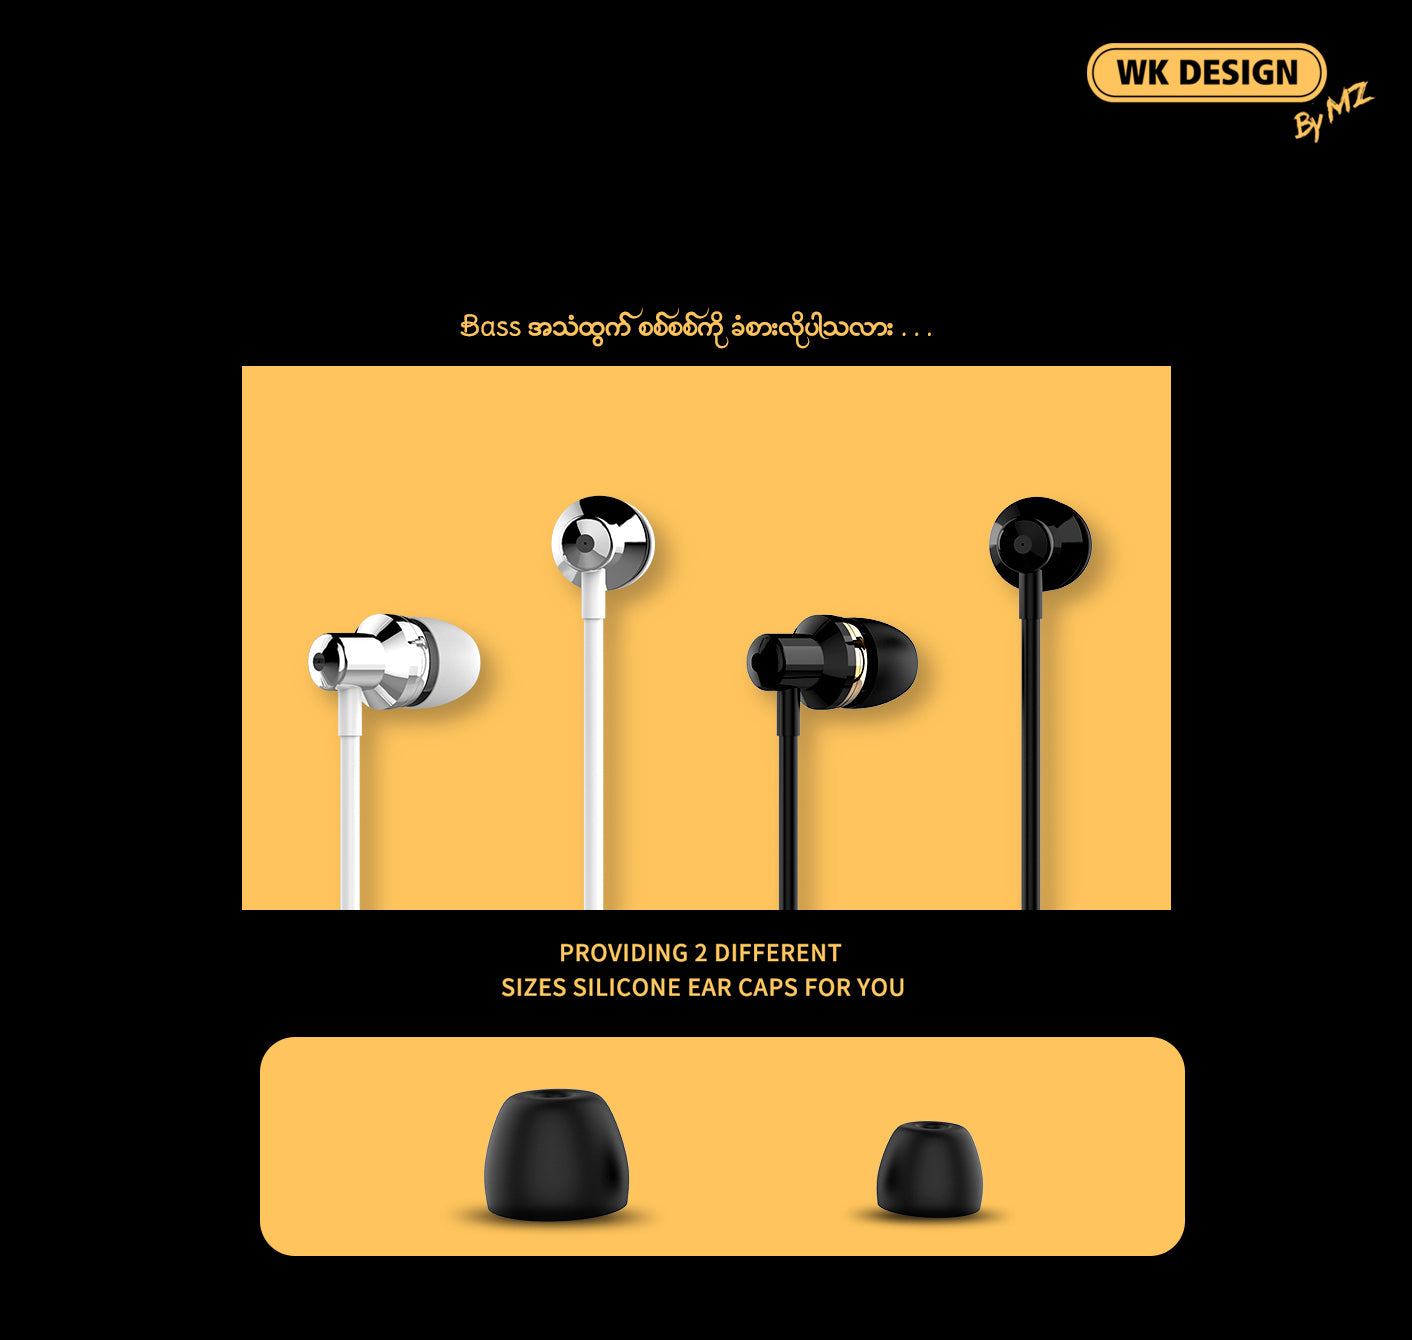 WK WI90 Wired Earphone - White